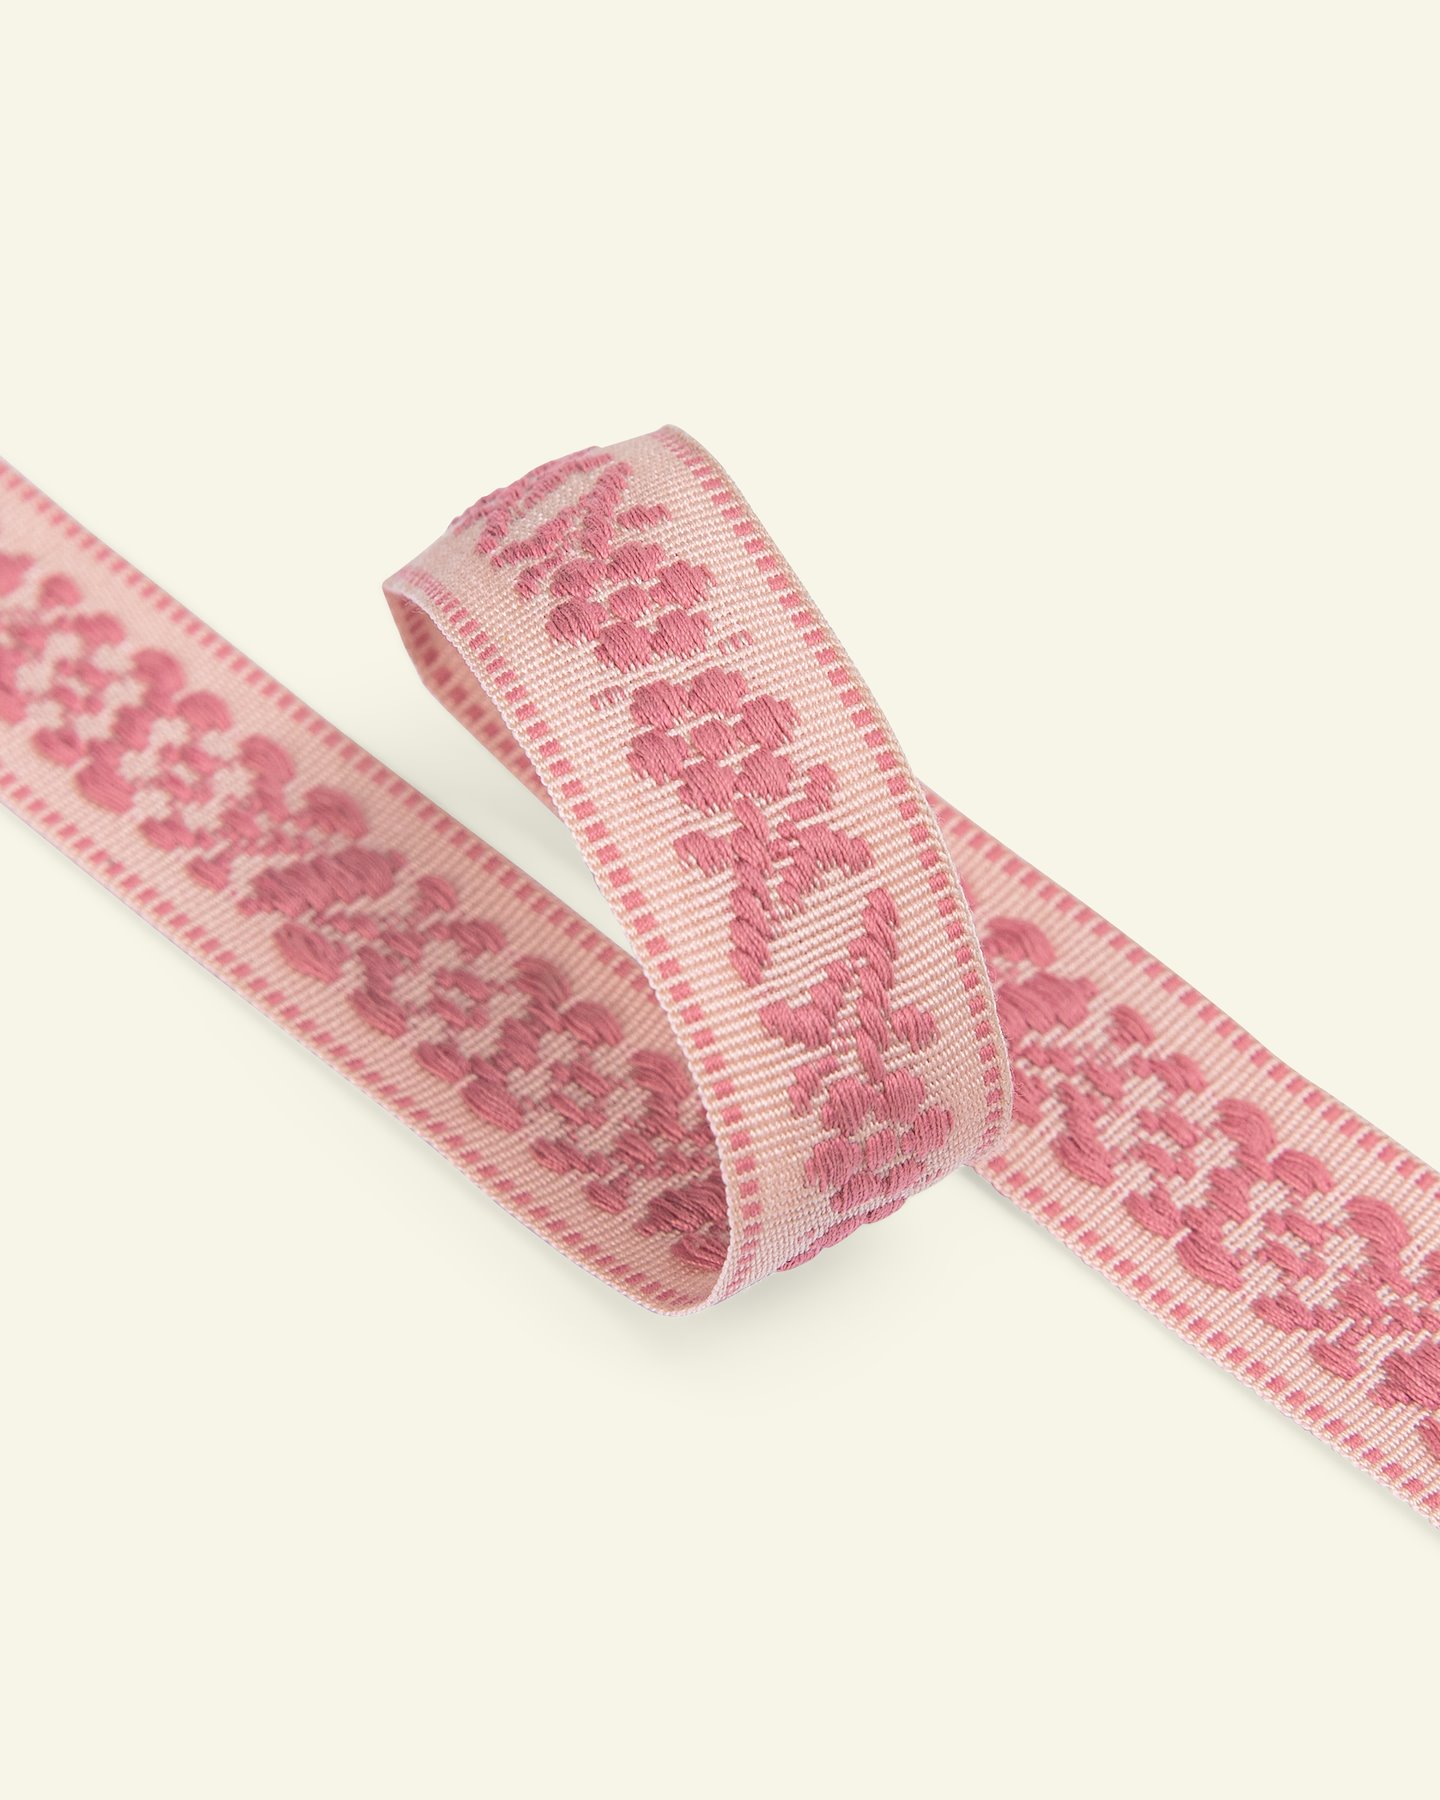 Pedal to the Metal in Evening - 1 1/2in Jacquard Ribbon, from HomeMade –  The Trendy Little Geek